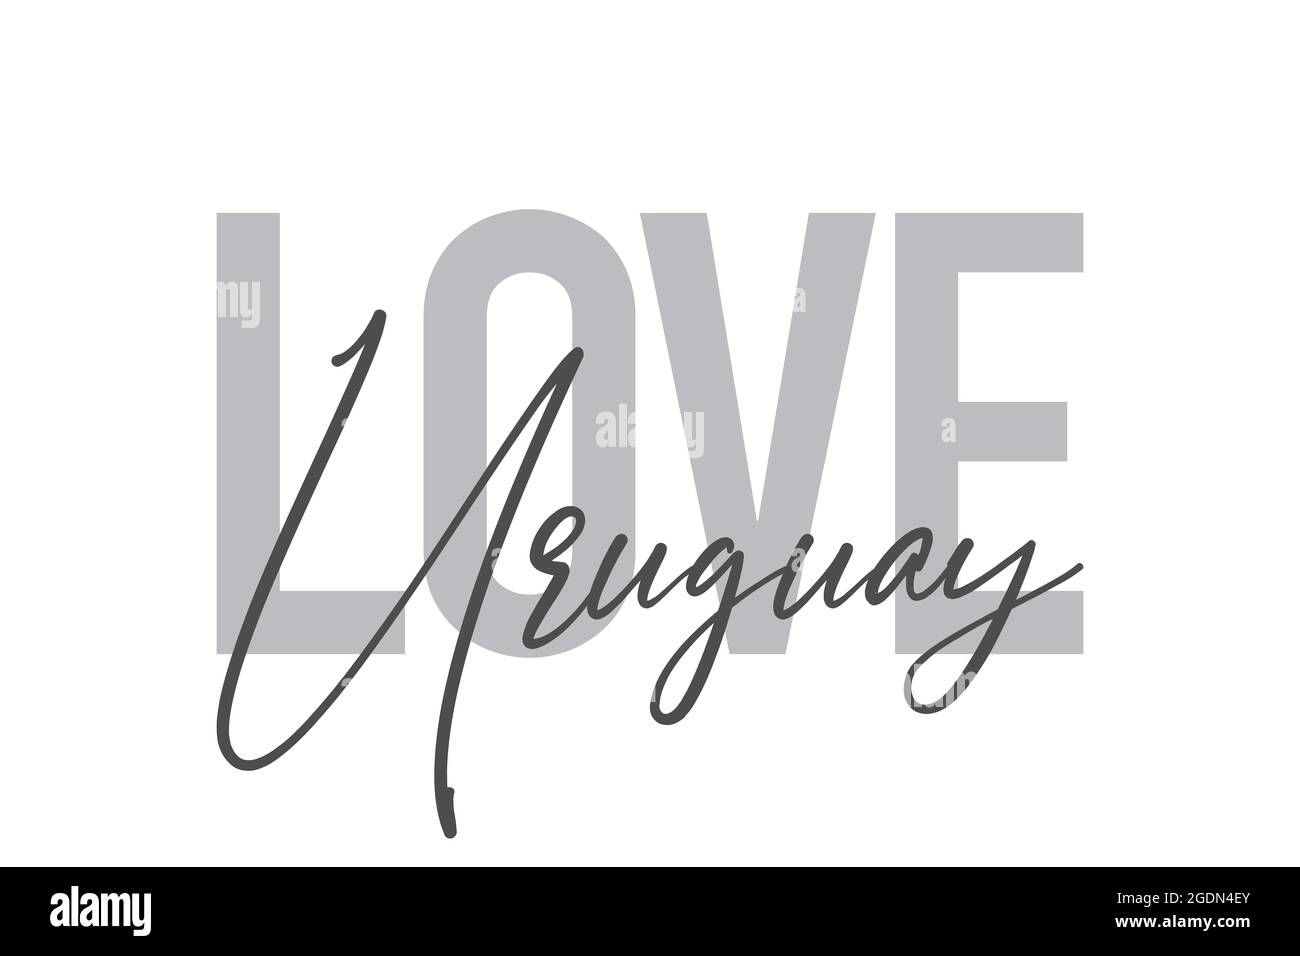 Modern, simple, minimal typographic design of a saying 'Love Uruguay' in tones of grey color. Cool, urban, trendy and playful graphic vector art with Stock Photo